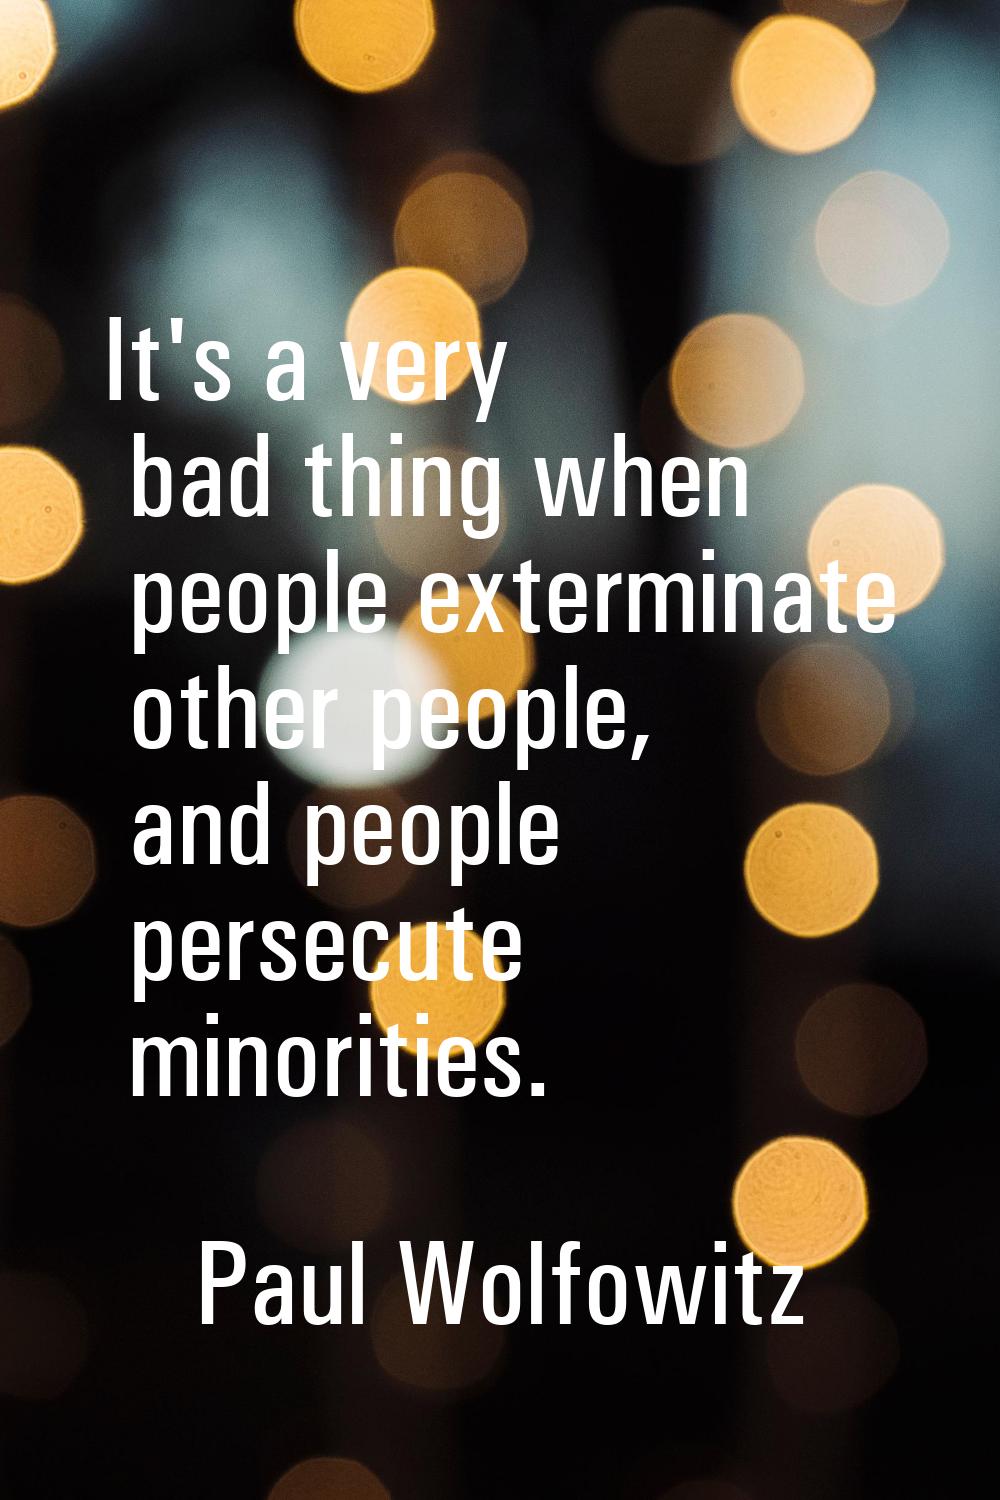 It's a very bad thing when people exterminate other people, and people persecute minorities.